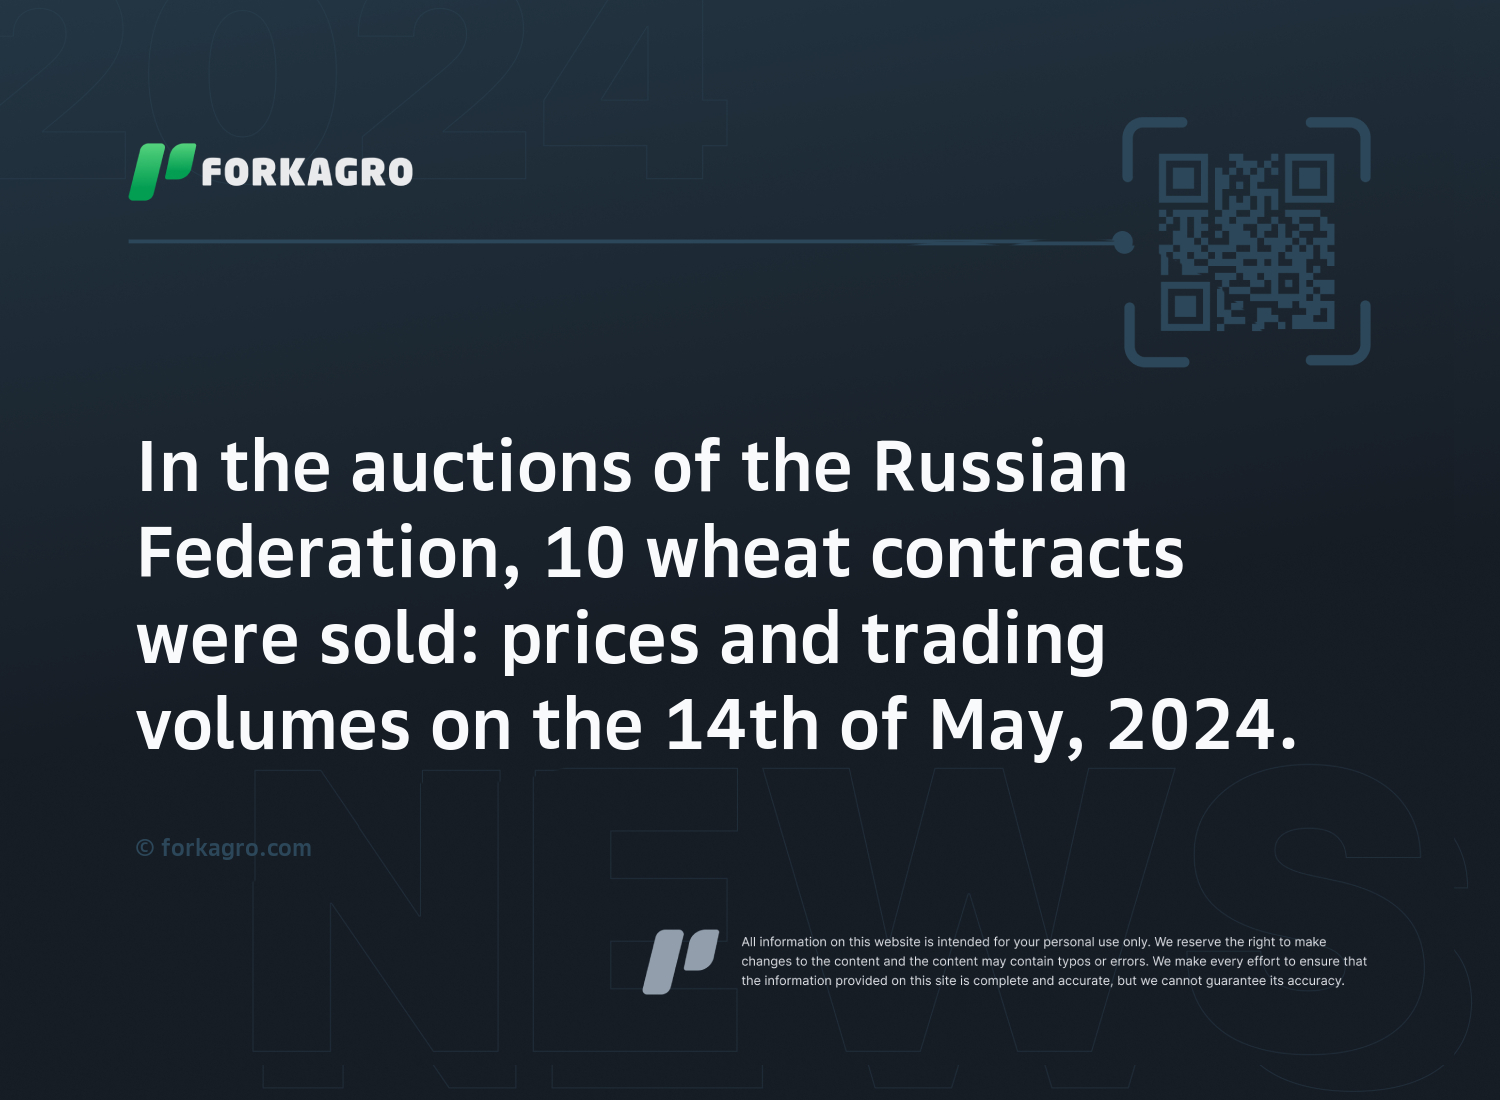 In the auctions of the Russian Federation, 10 wheat contracts were sold: prices and trading volumes on the 14th of May, 2024.